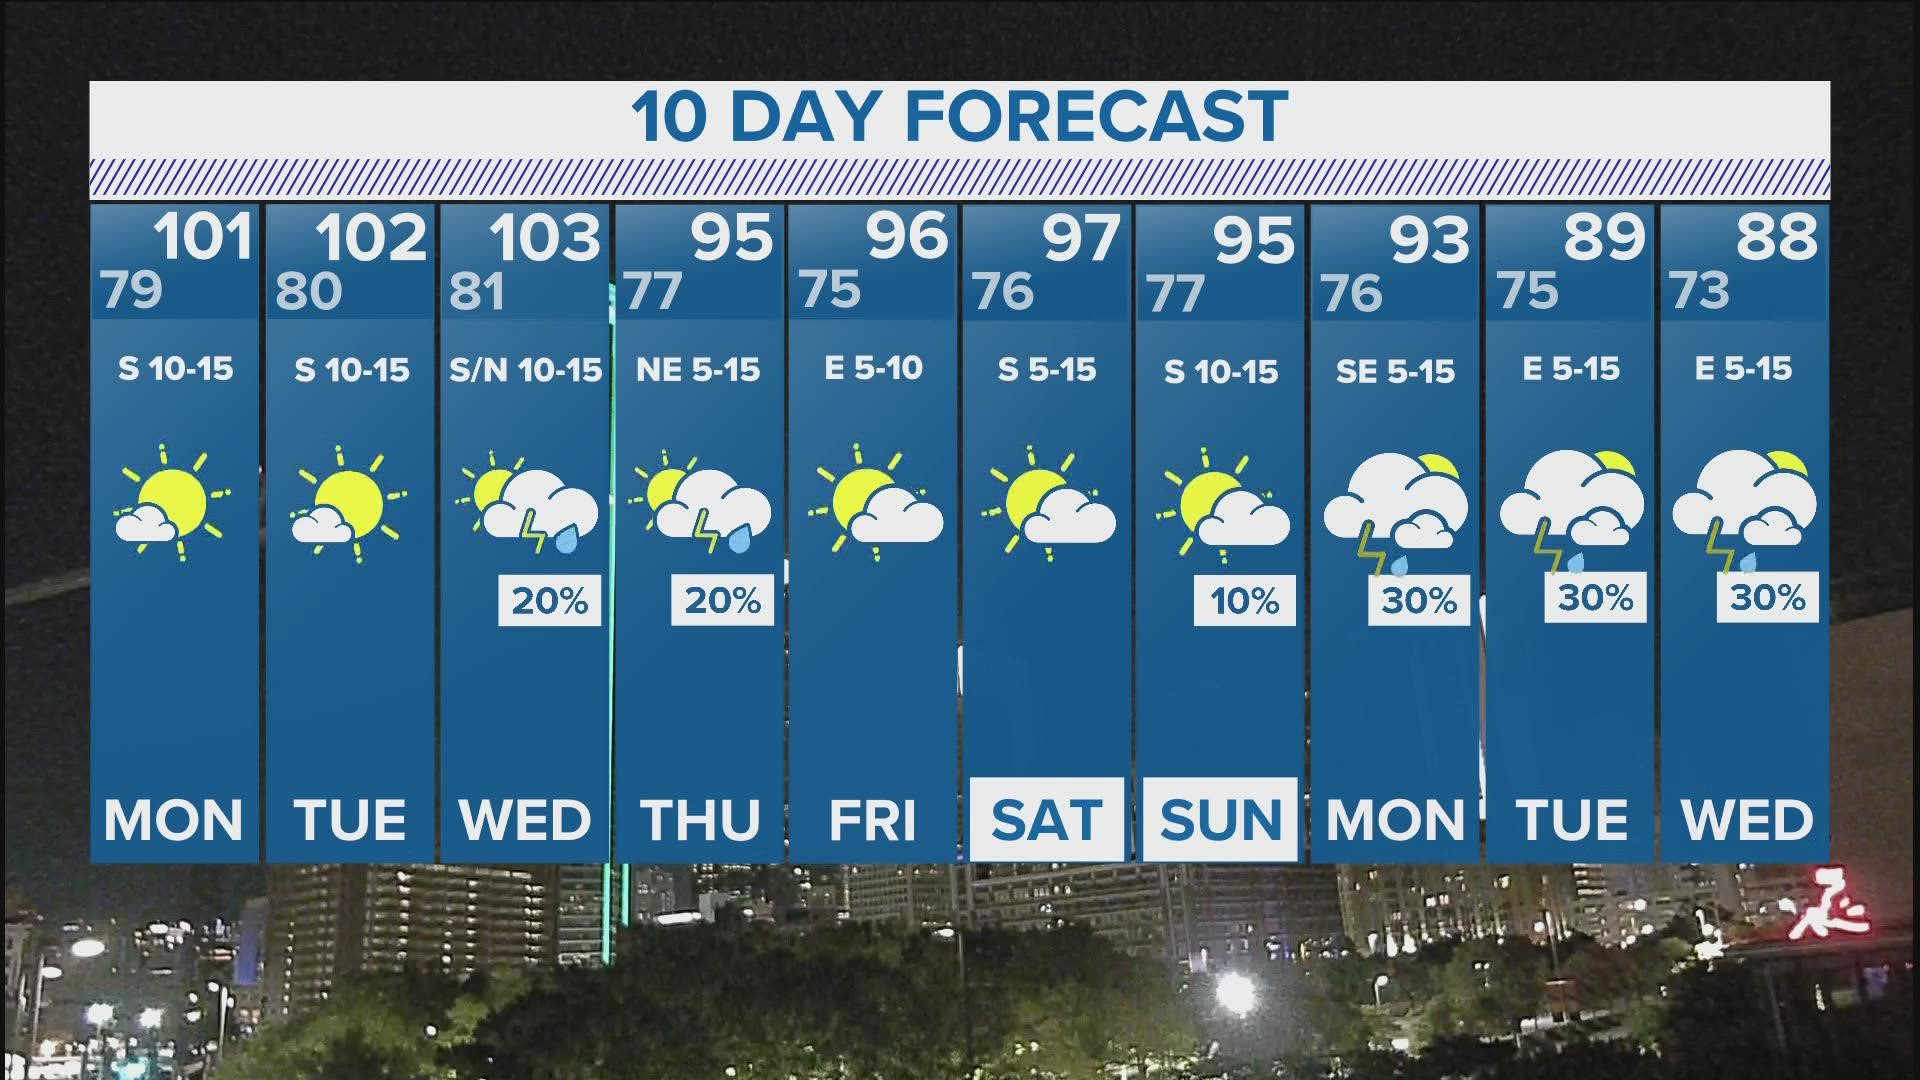 North Texas will have to deal with triple-digit heat to start the week. But the 10-day forecast has temperatures in the 80s soon!